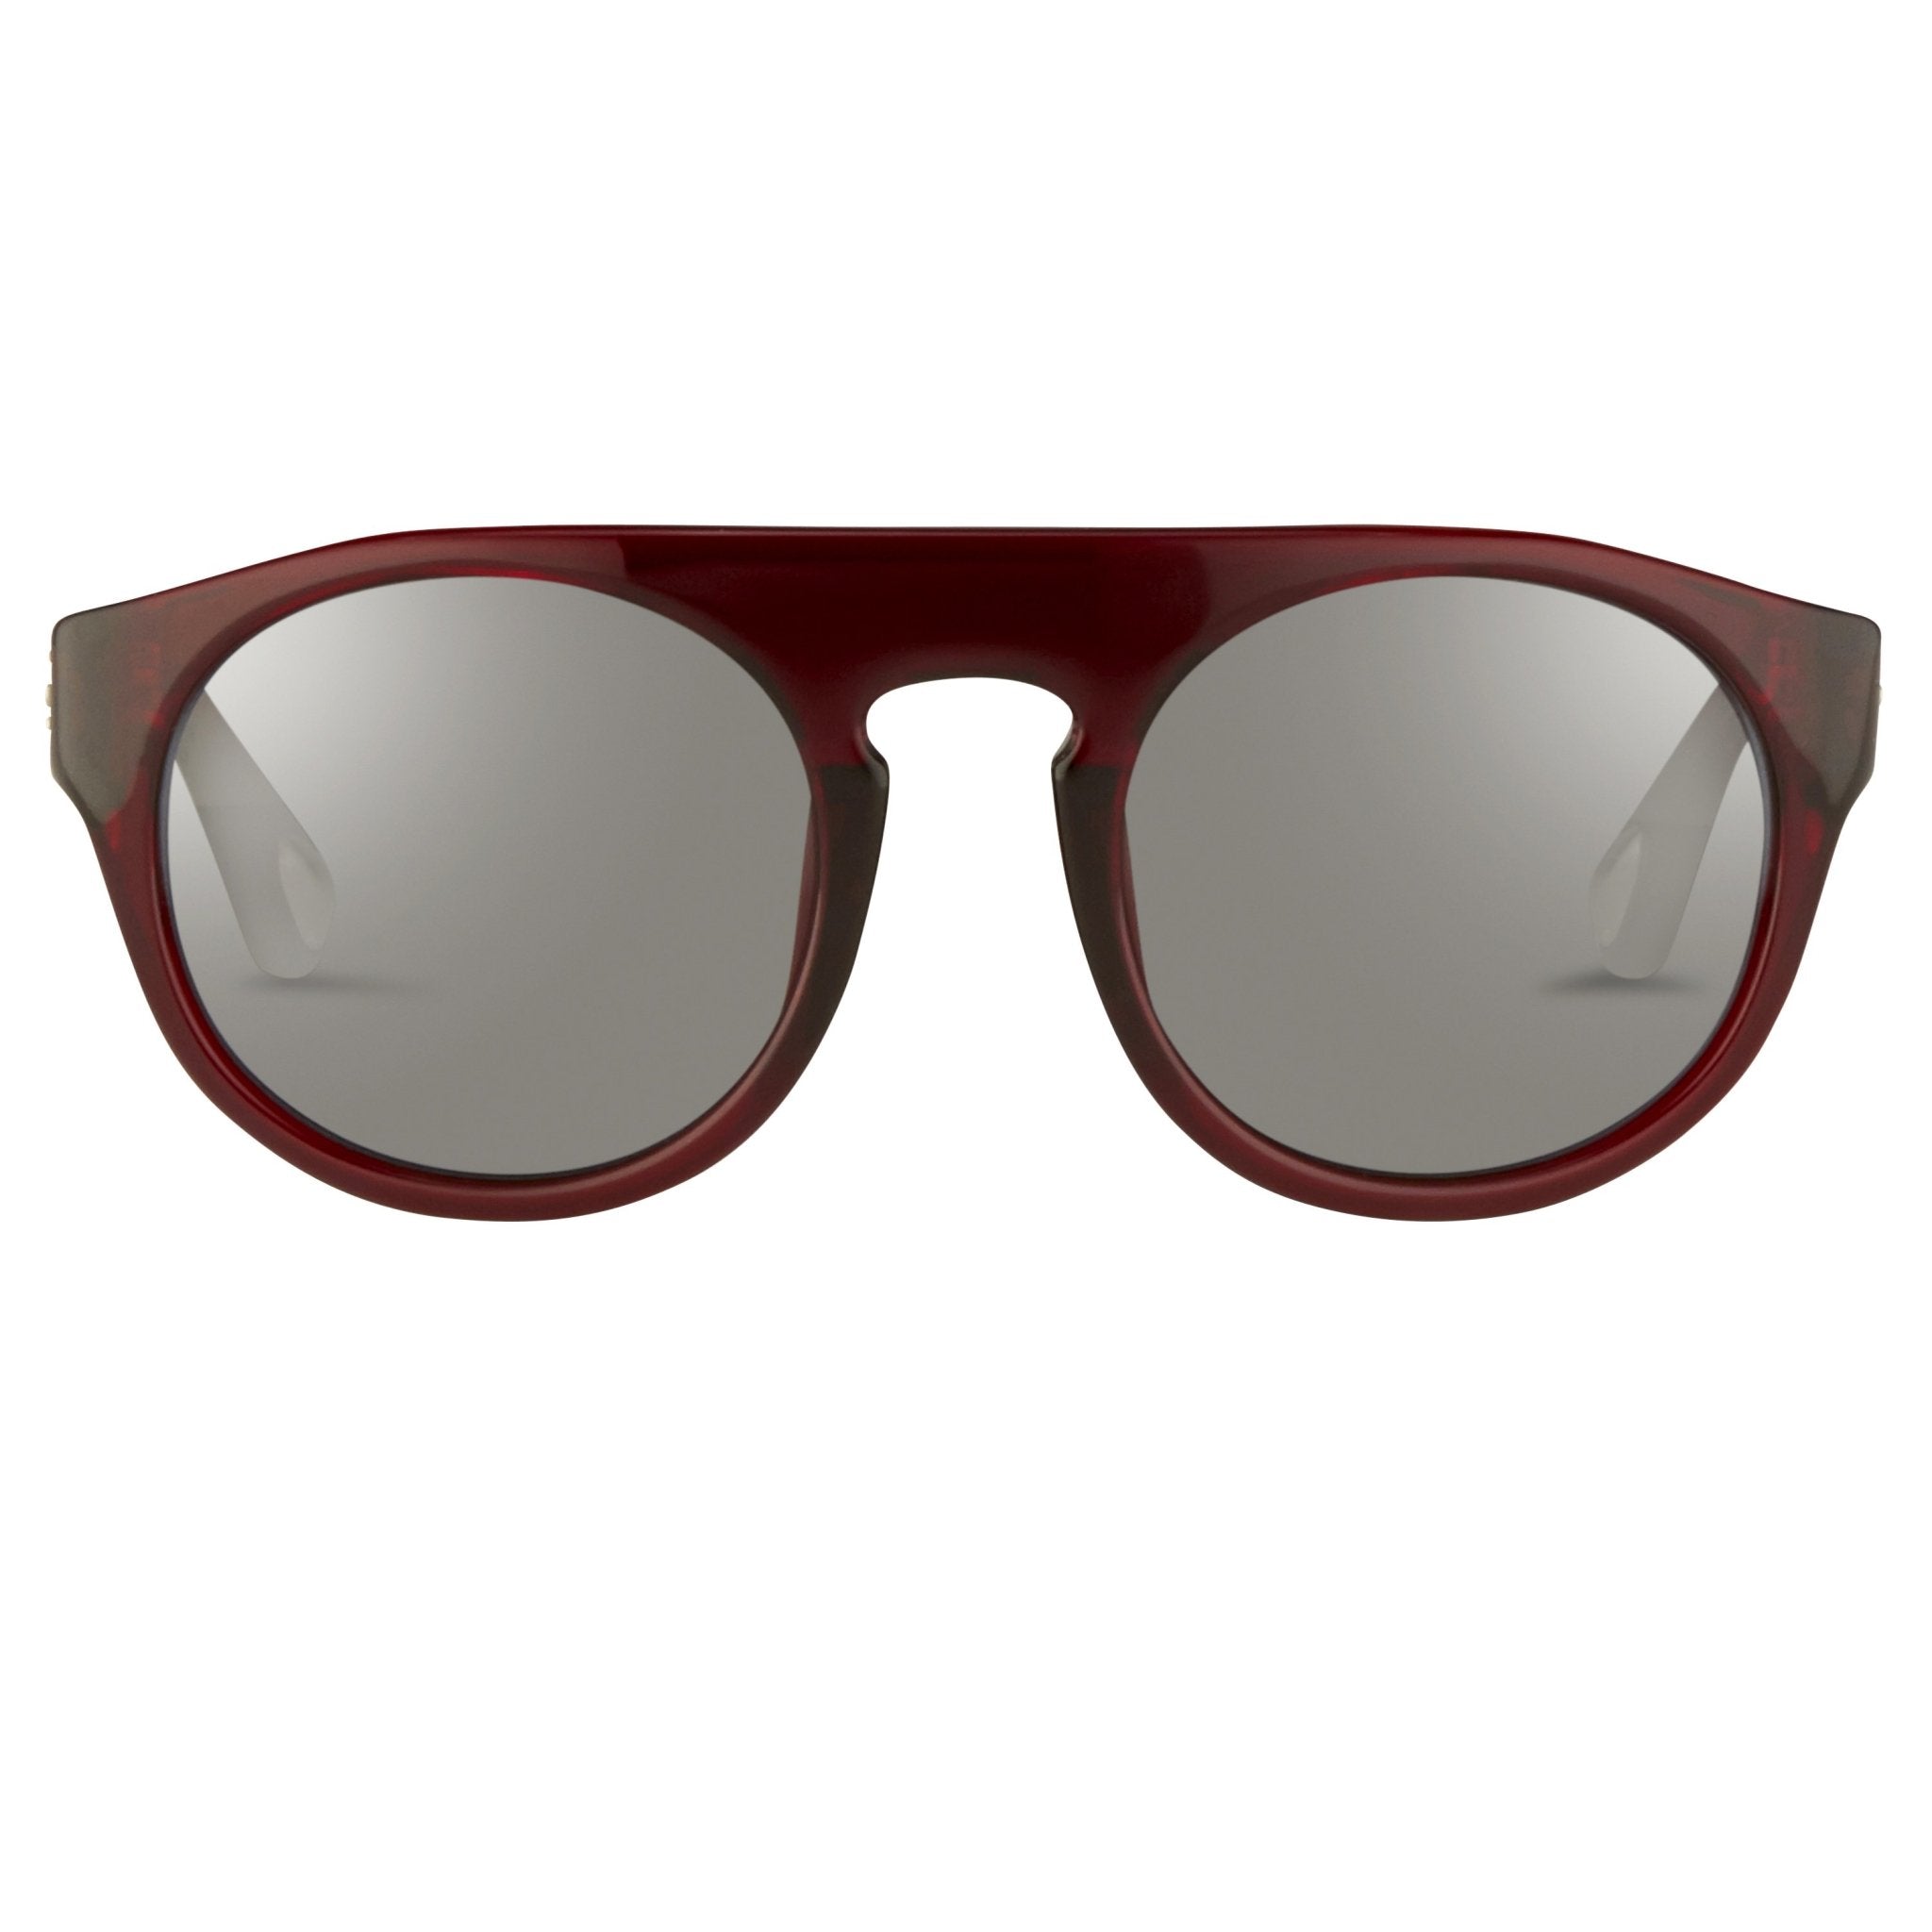 Ann Demeulemeester Sunglasses Flat Top Bordeaux Red 925 Silver with Blue Lenses Category 2 AD10C3SUN - Watches & Crystals